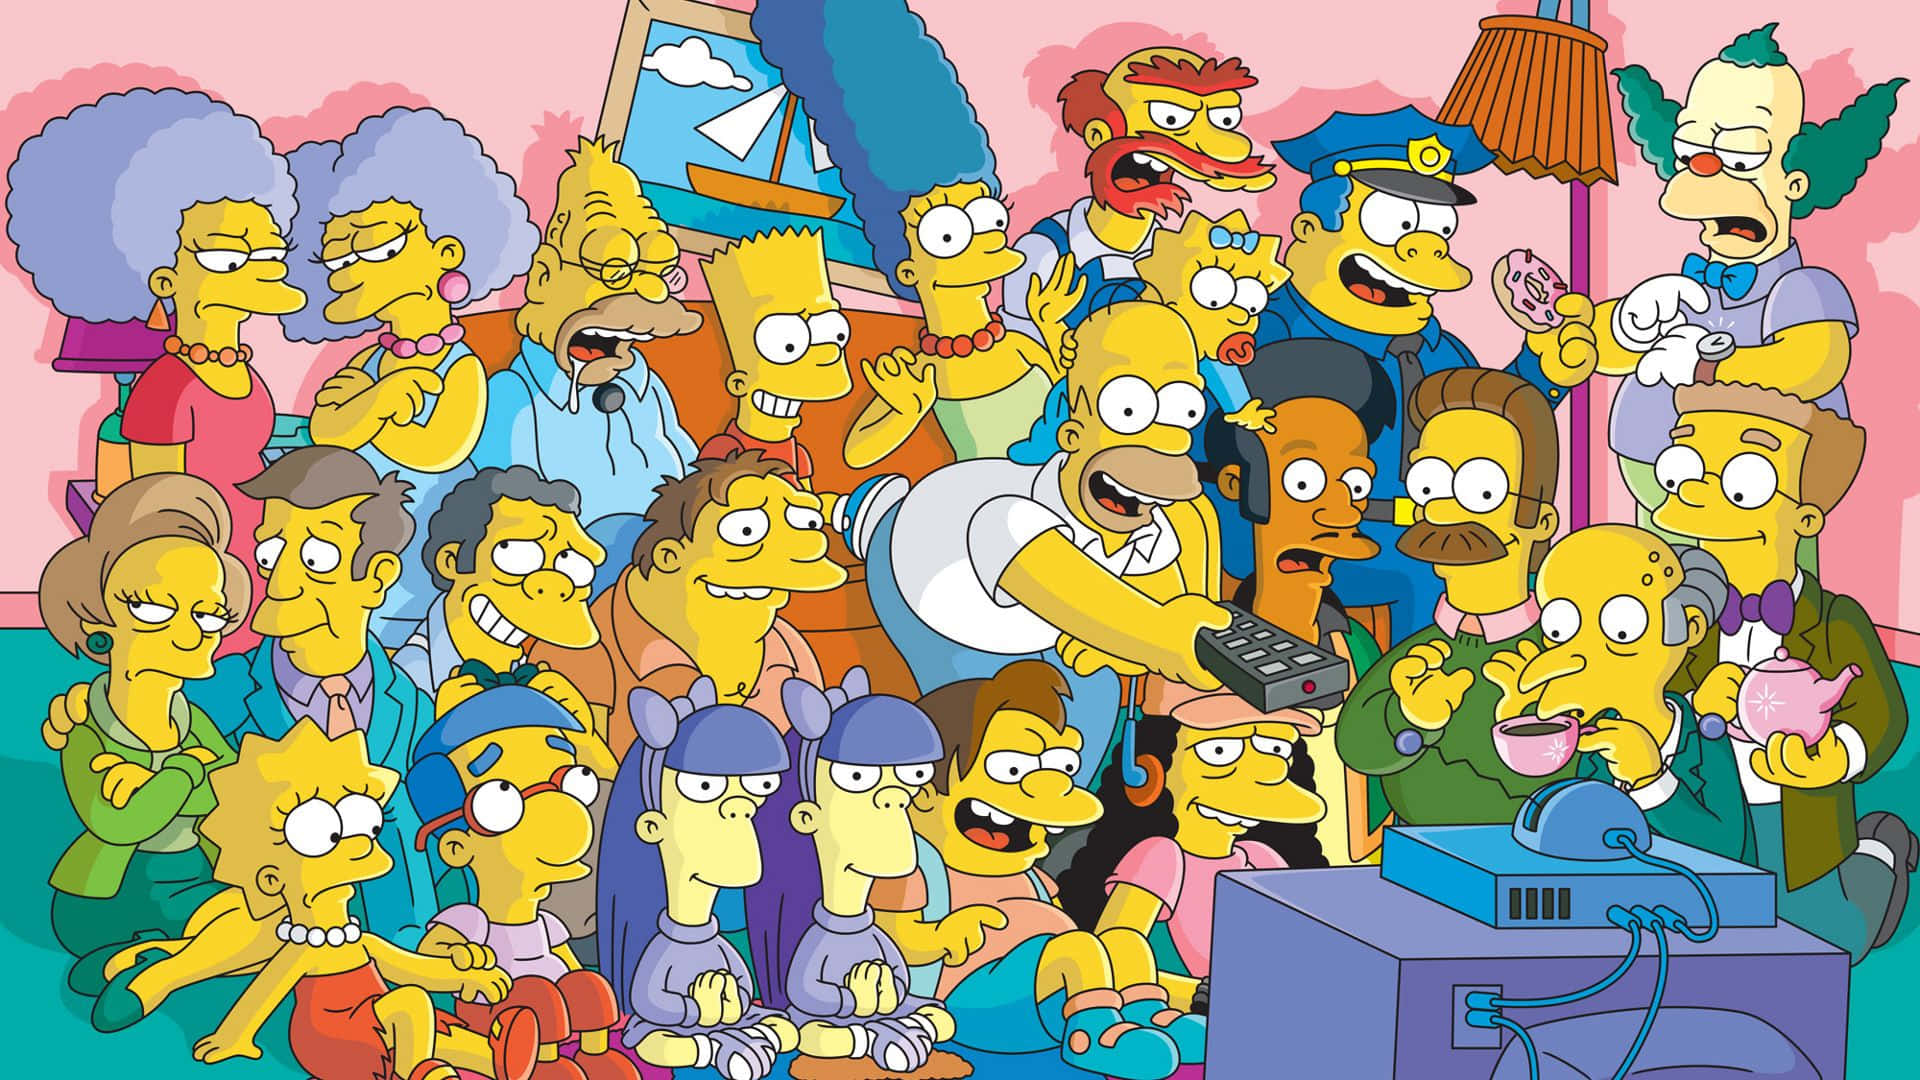 Homer Simpson and Bart Simpson enjoying their favorite activity on the computer. Wallpaper